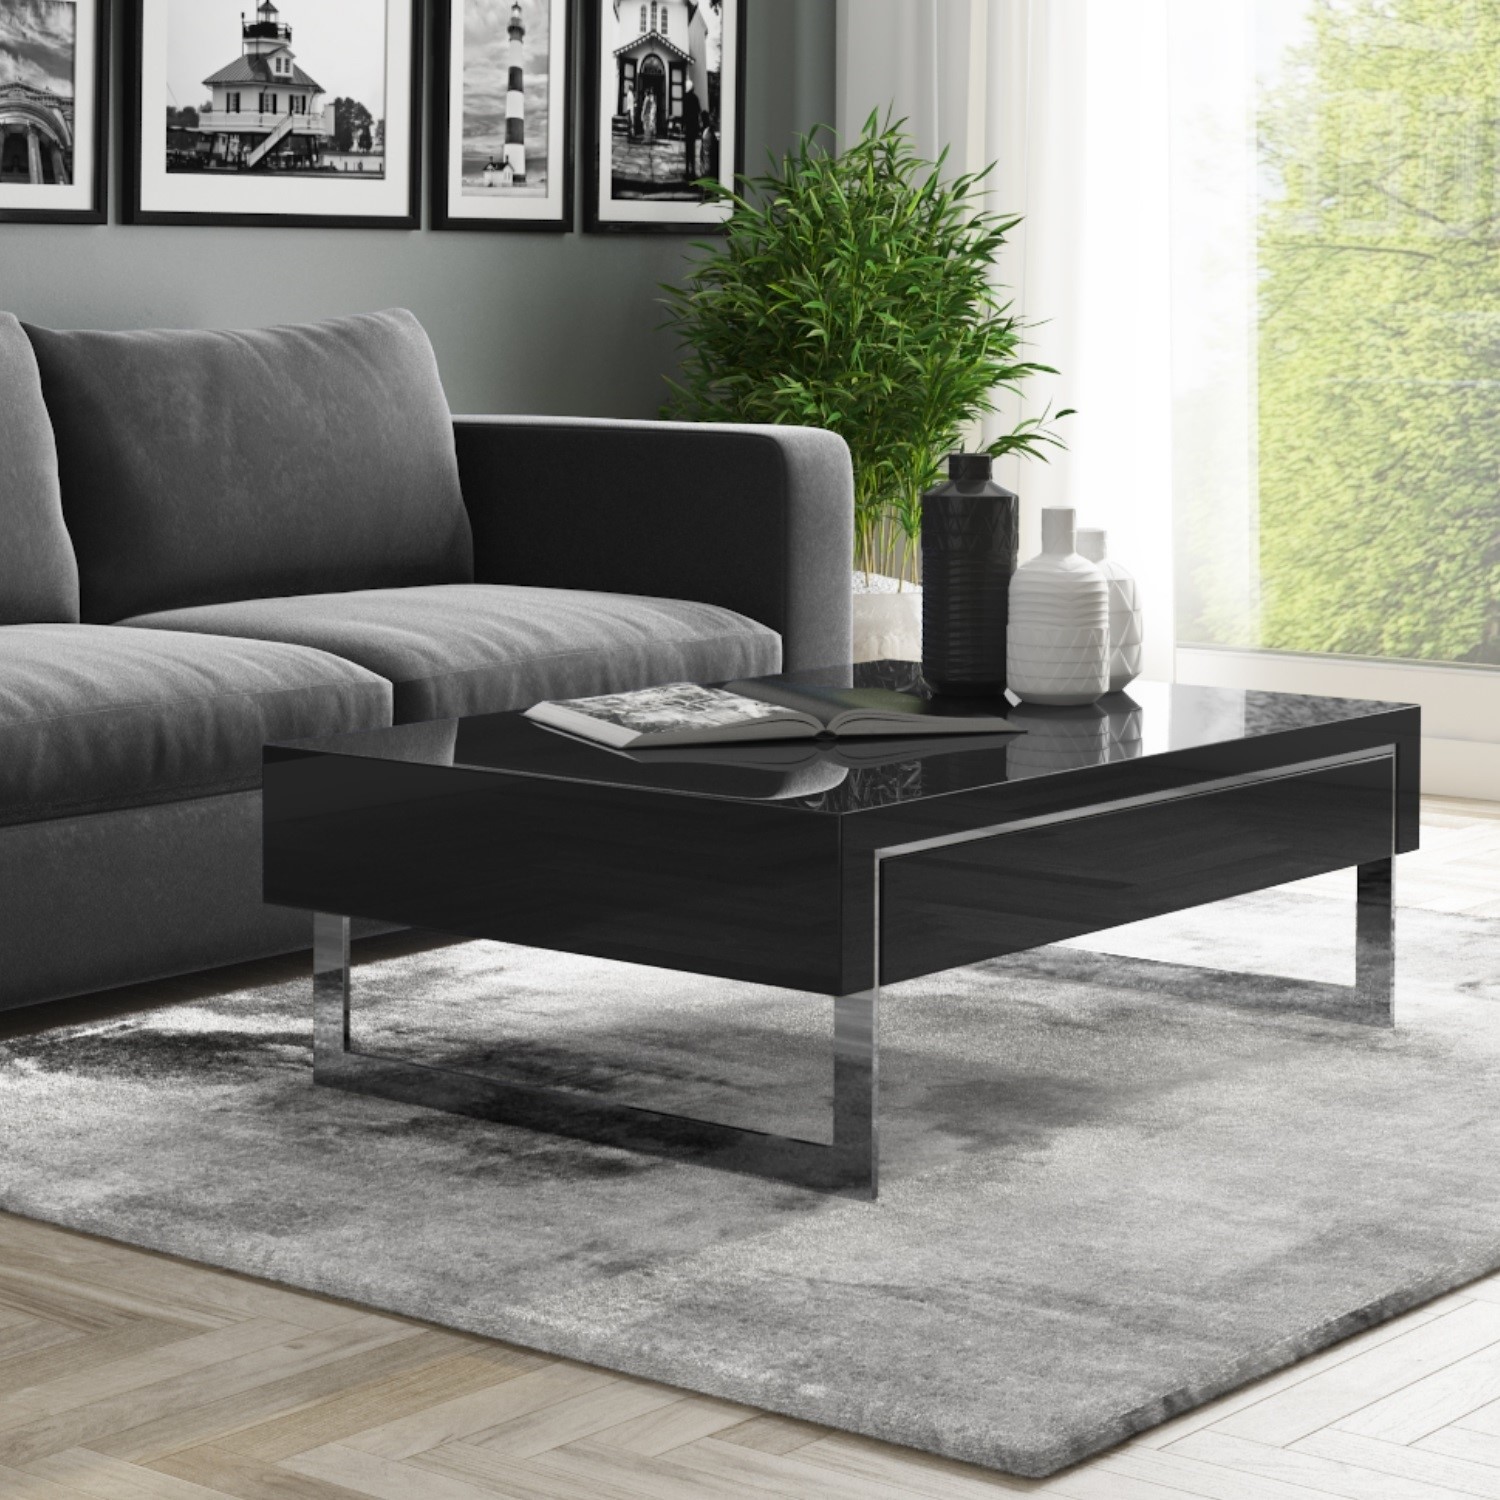 Black Gloss Coffee Table With Storage Drawers Evoque Furniture123